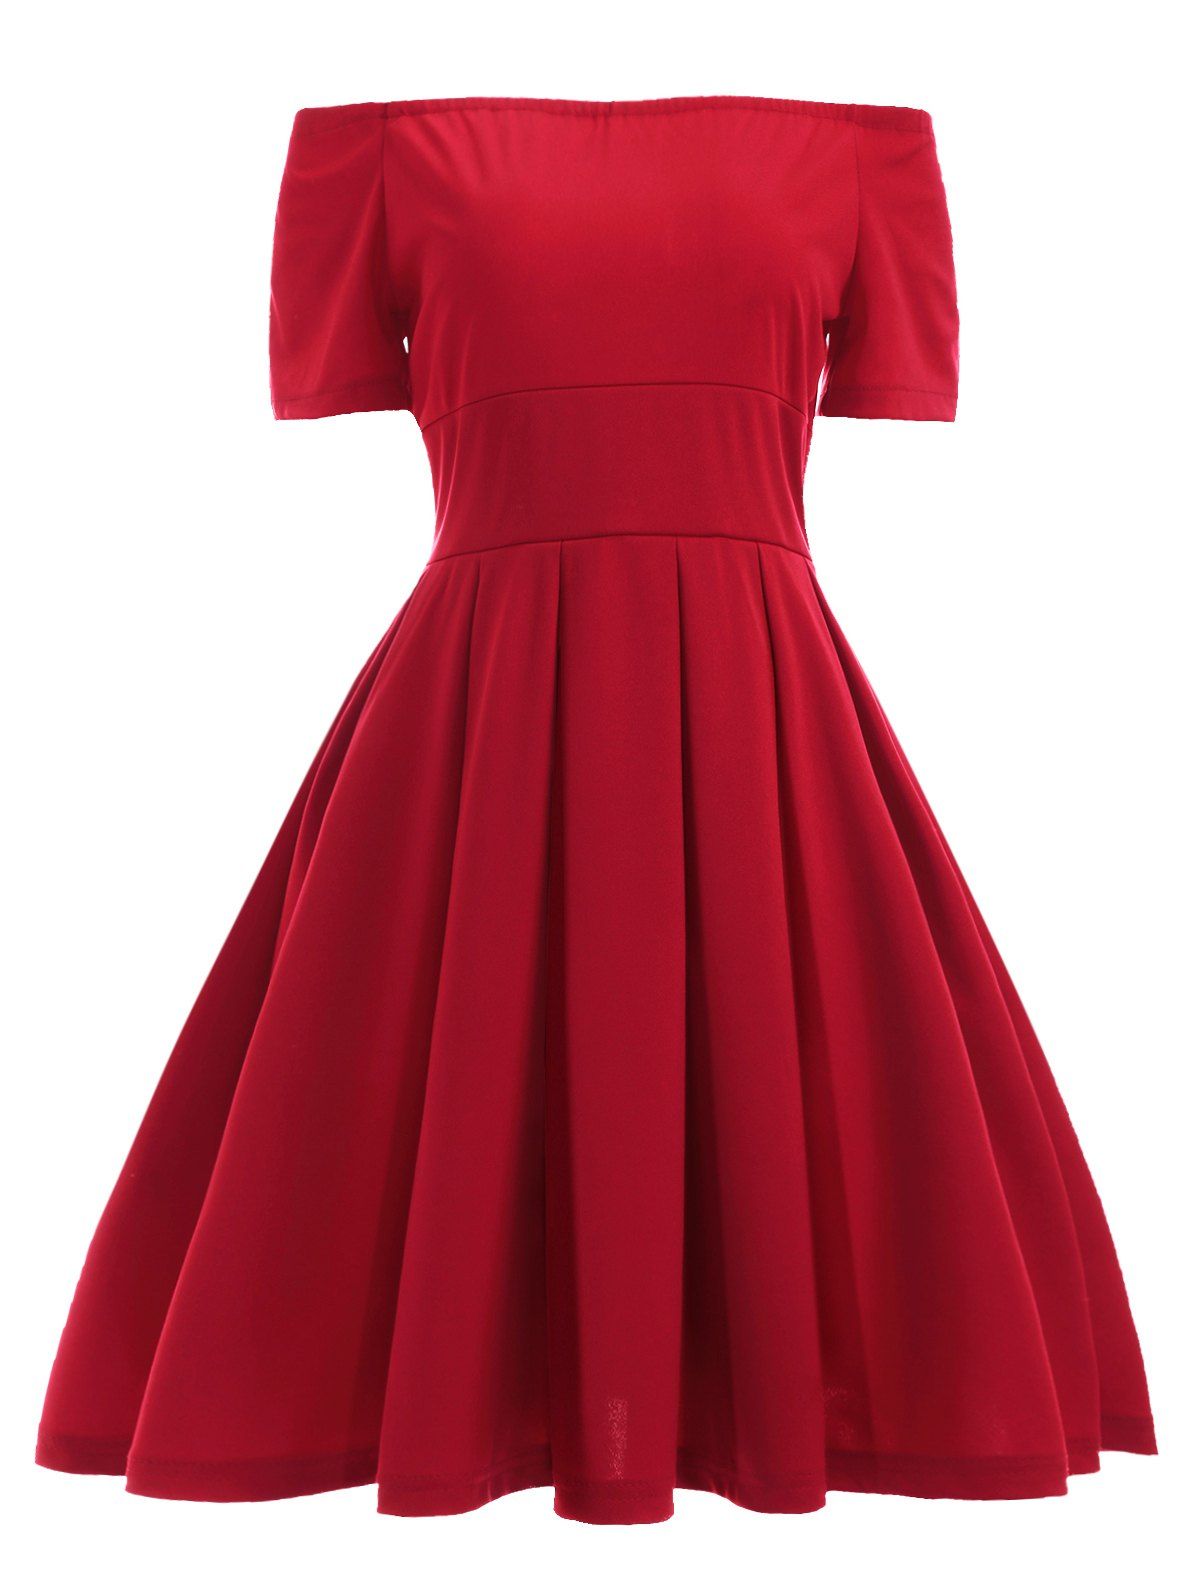 [47% OFF] Vintage Off The Shoulder Convertible Red Pleated Dress | Rosegal